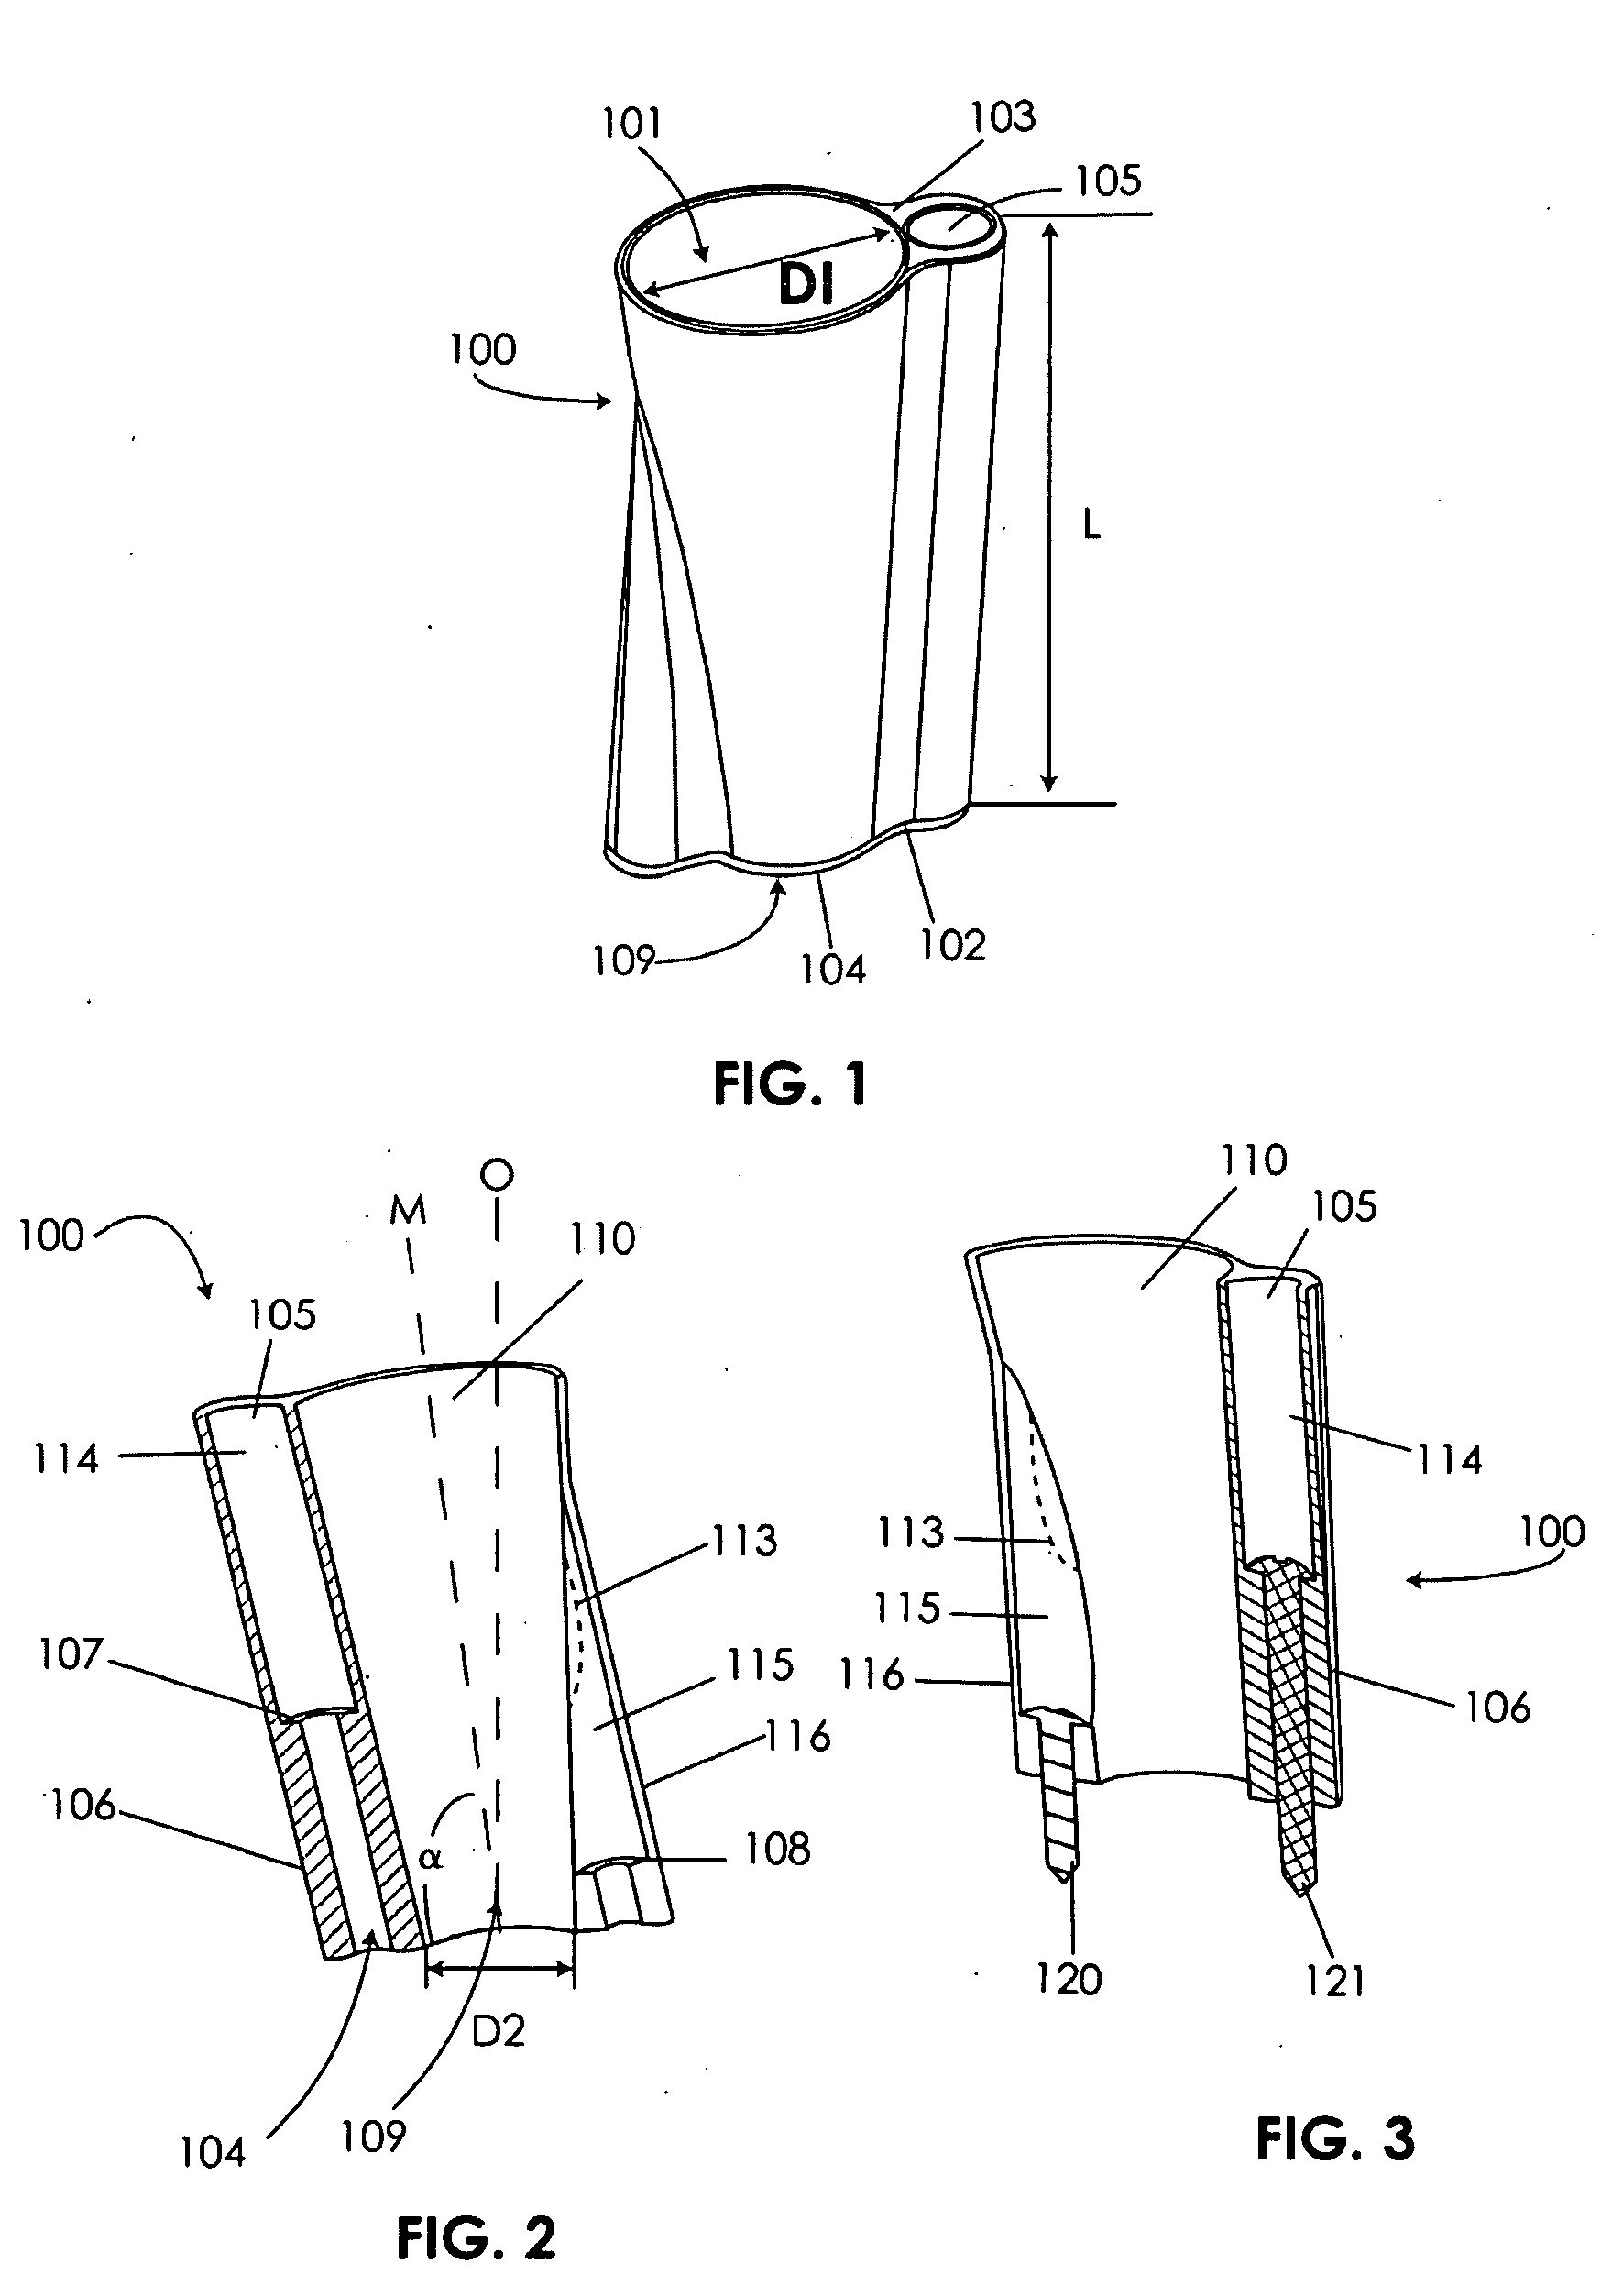 Vertebrally-mounted tissue retractor and method for use in spinal surgery